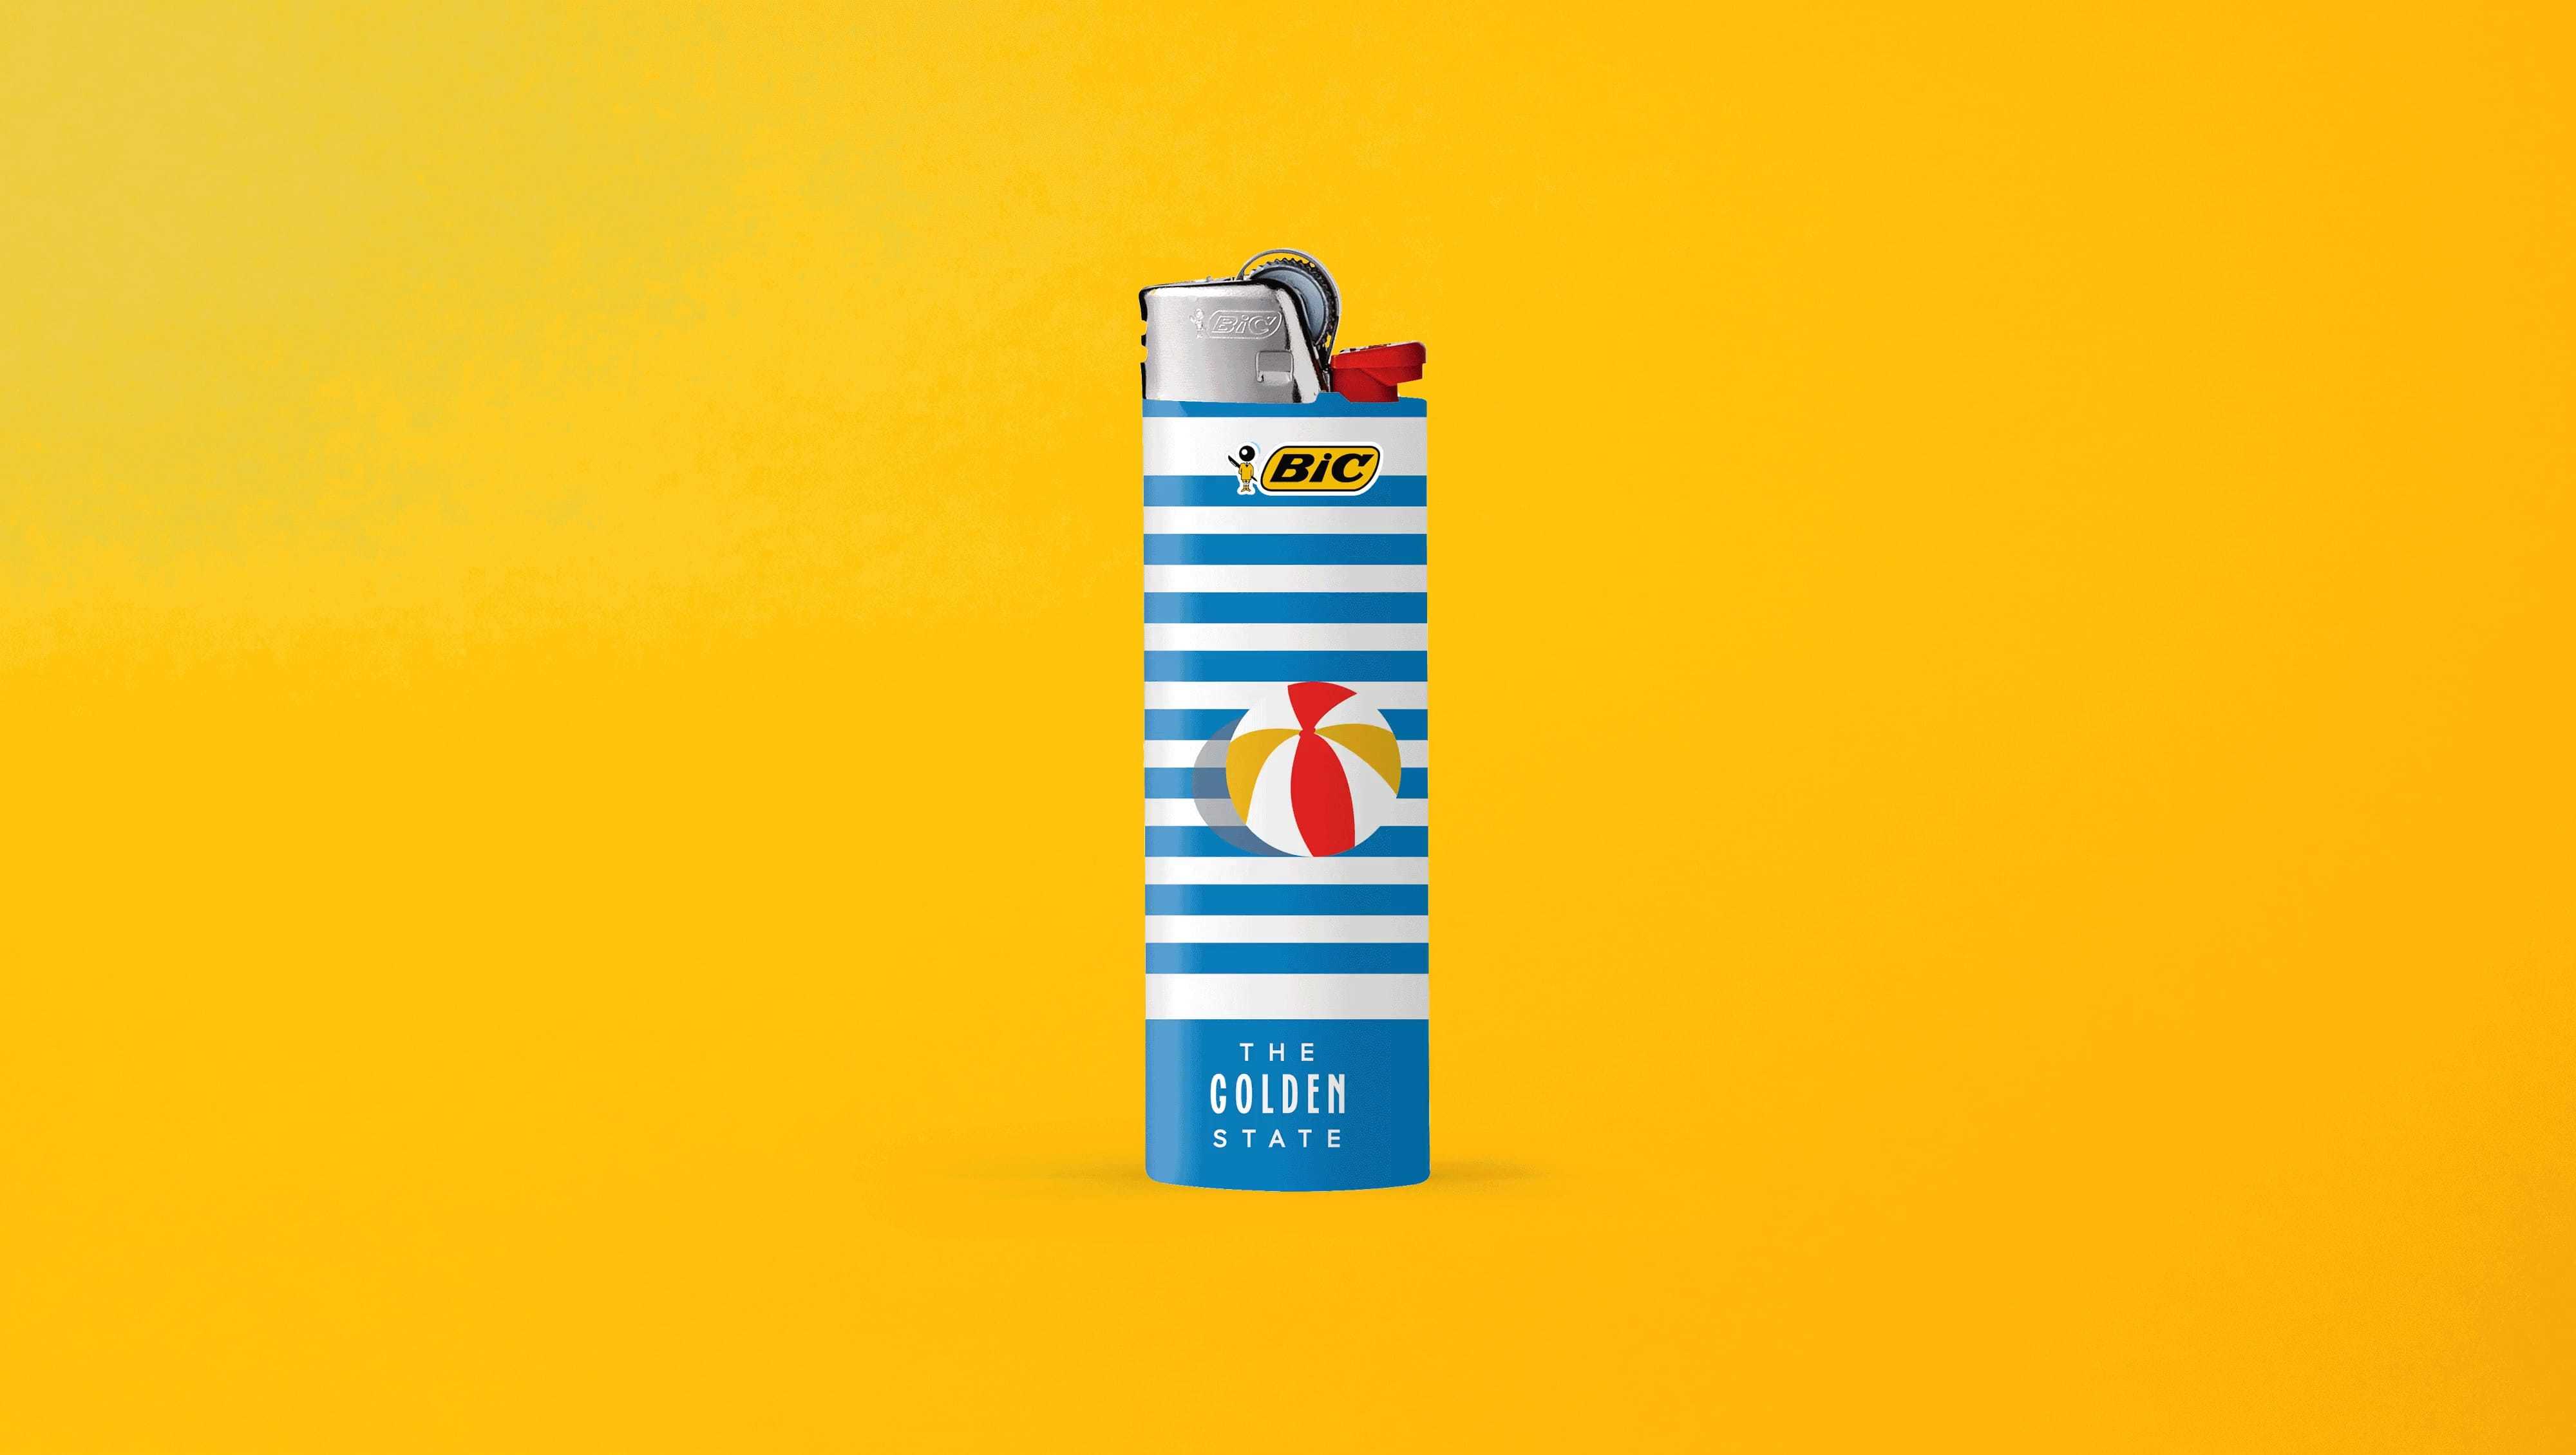 05 Bic Case Study Animation 1920x1080 Video Poster